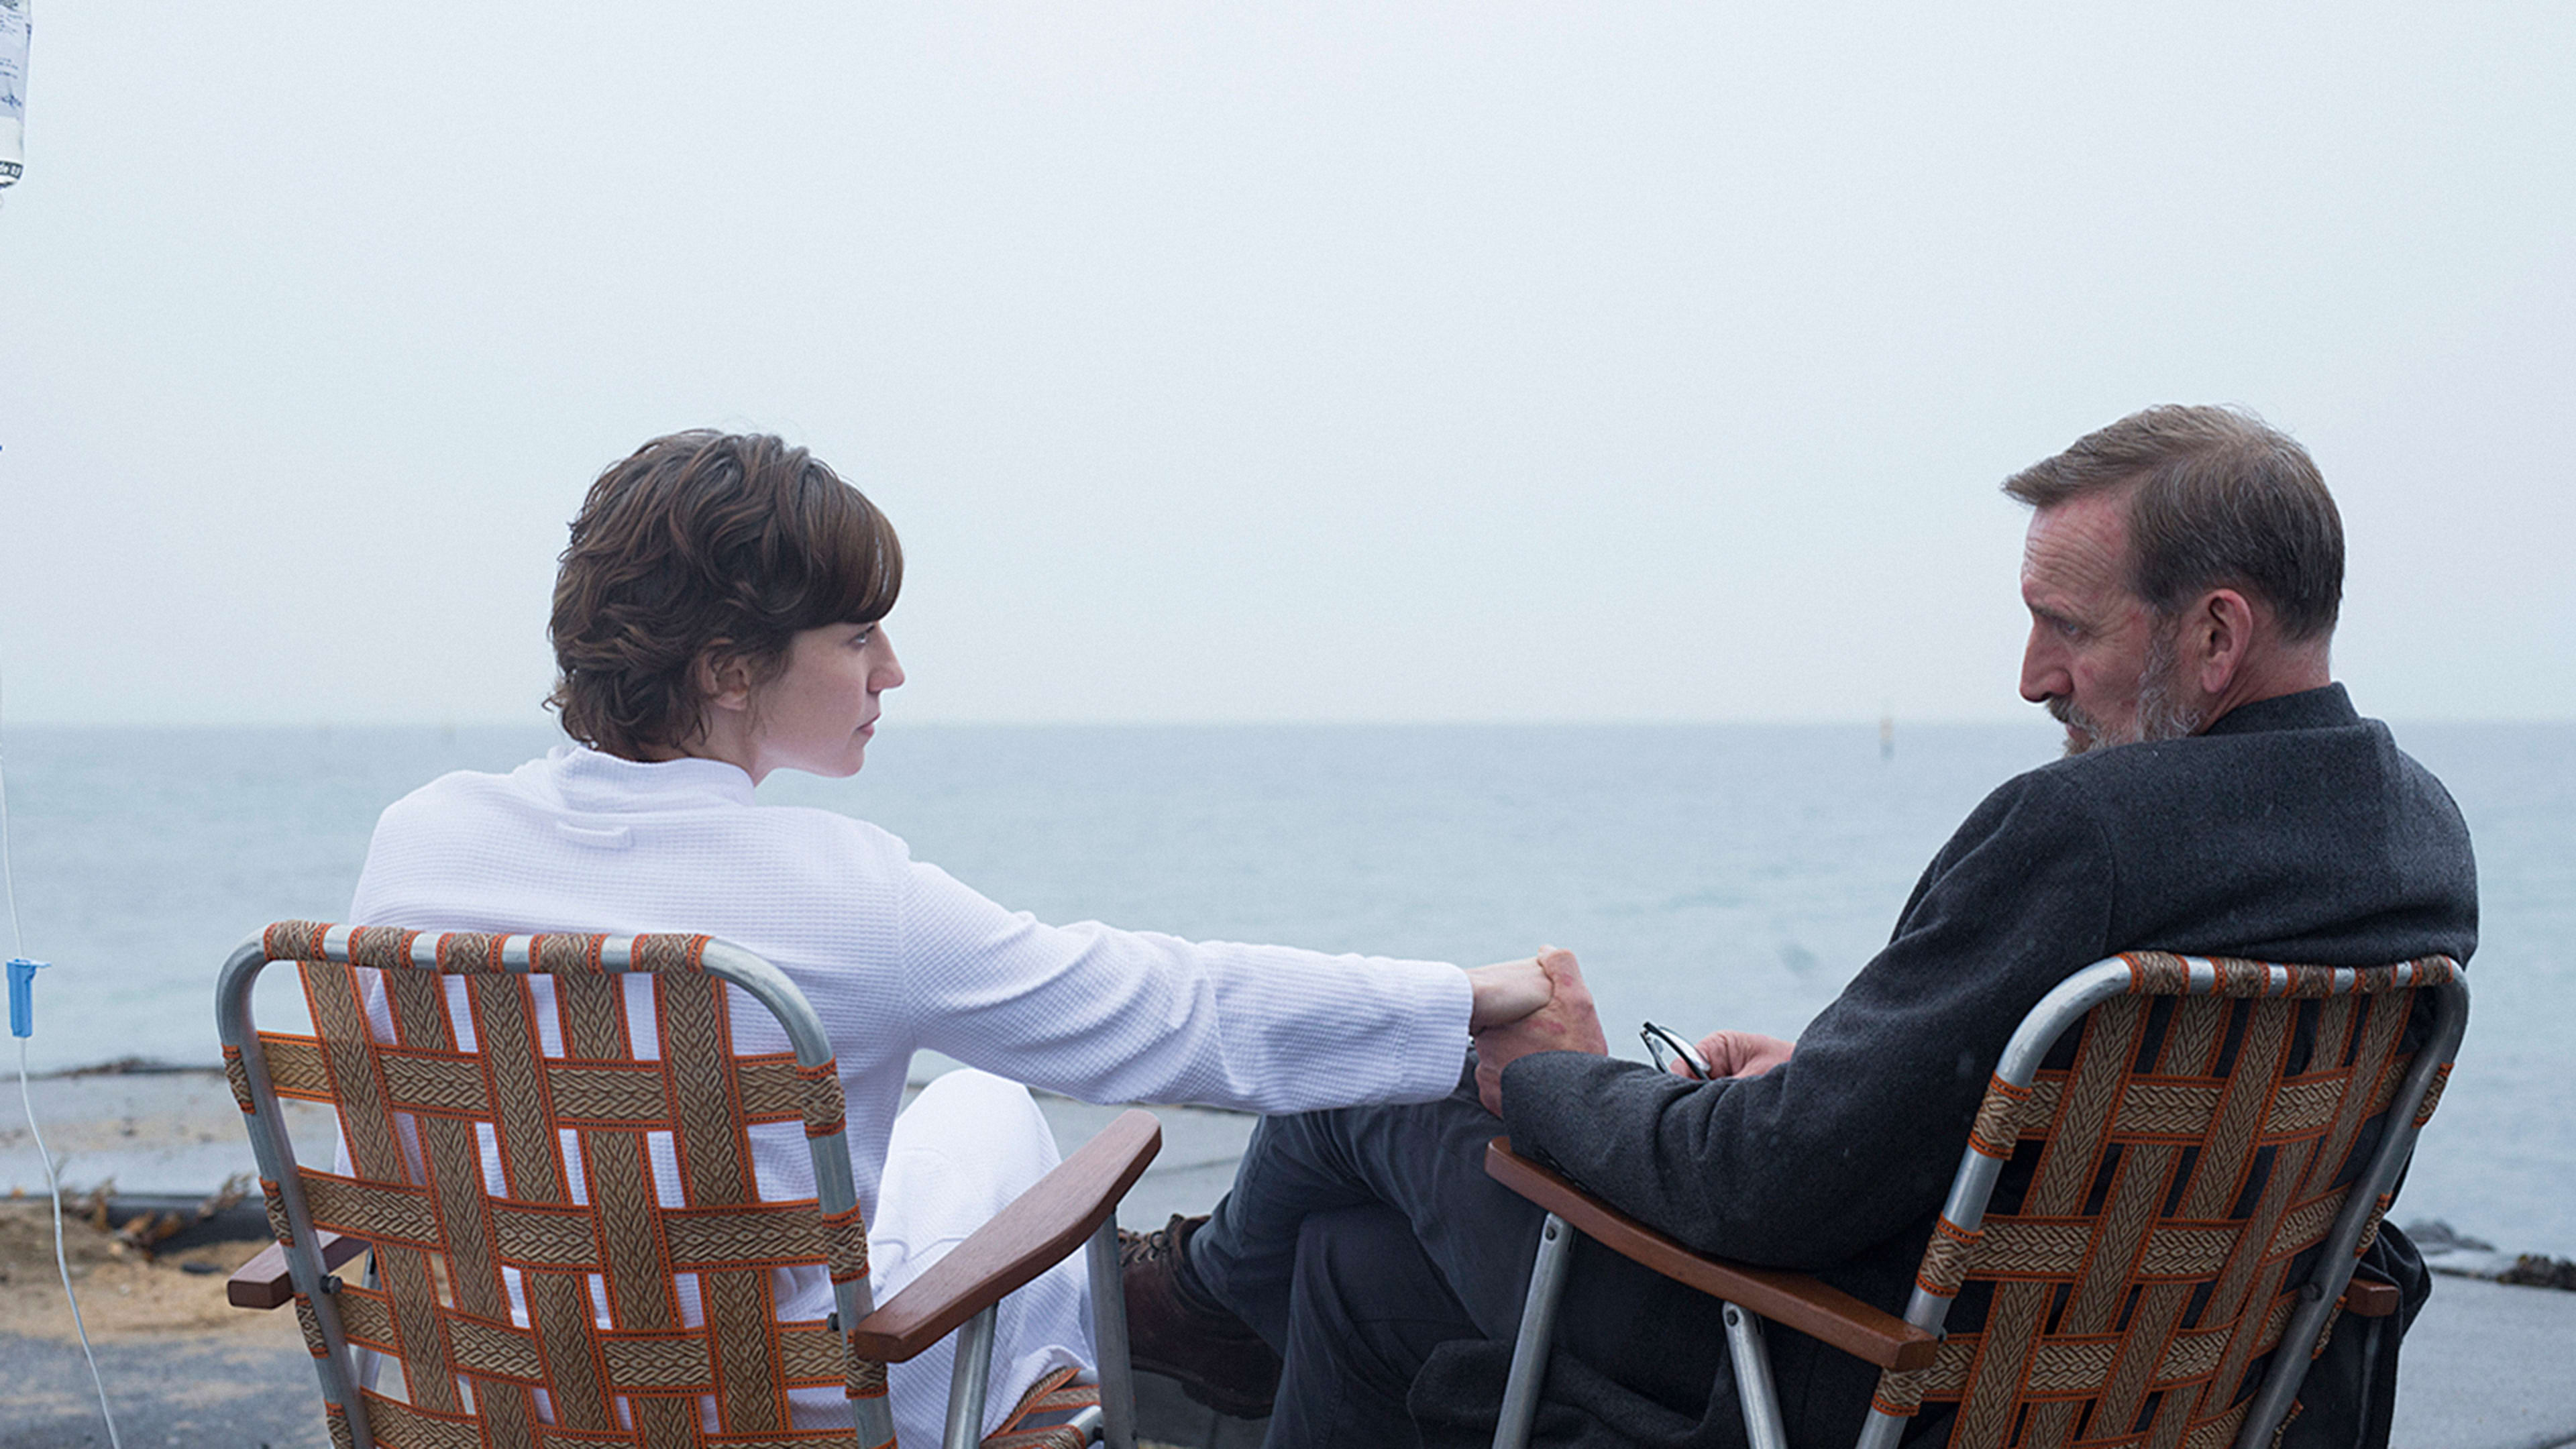 The End Is Here: An Exit Interview With “The Leftovers” Creator Damon Lindelof